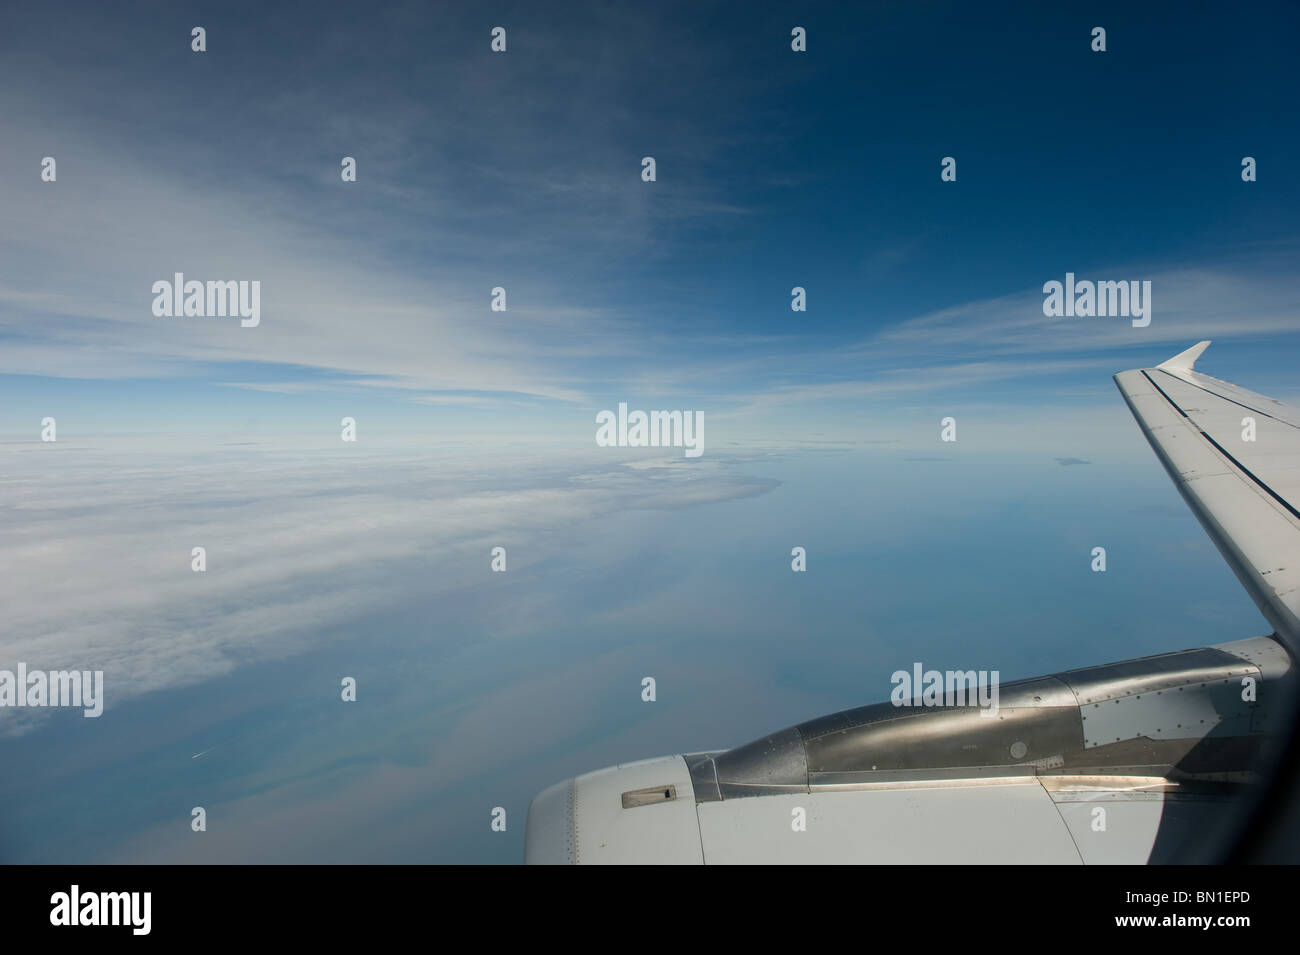 The view from the window of a passenger jet showing the engine and wing with a blue sky, Europe 2010 Stock Photo